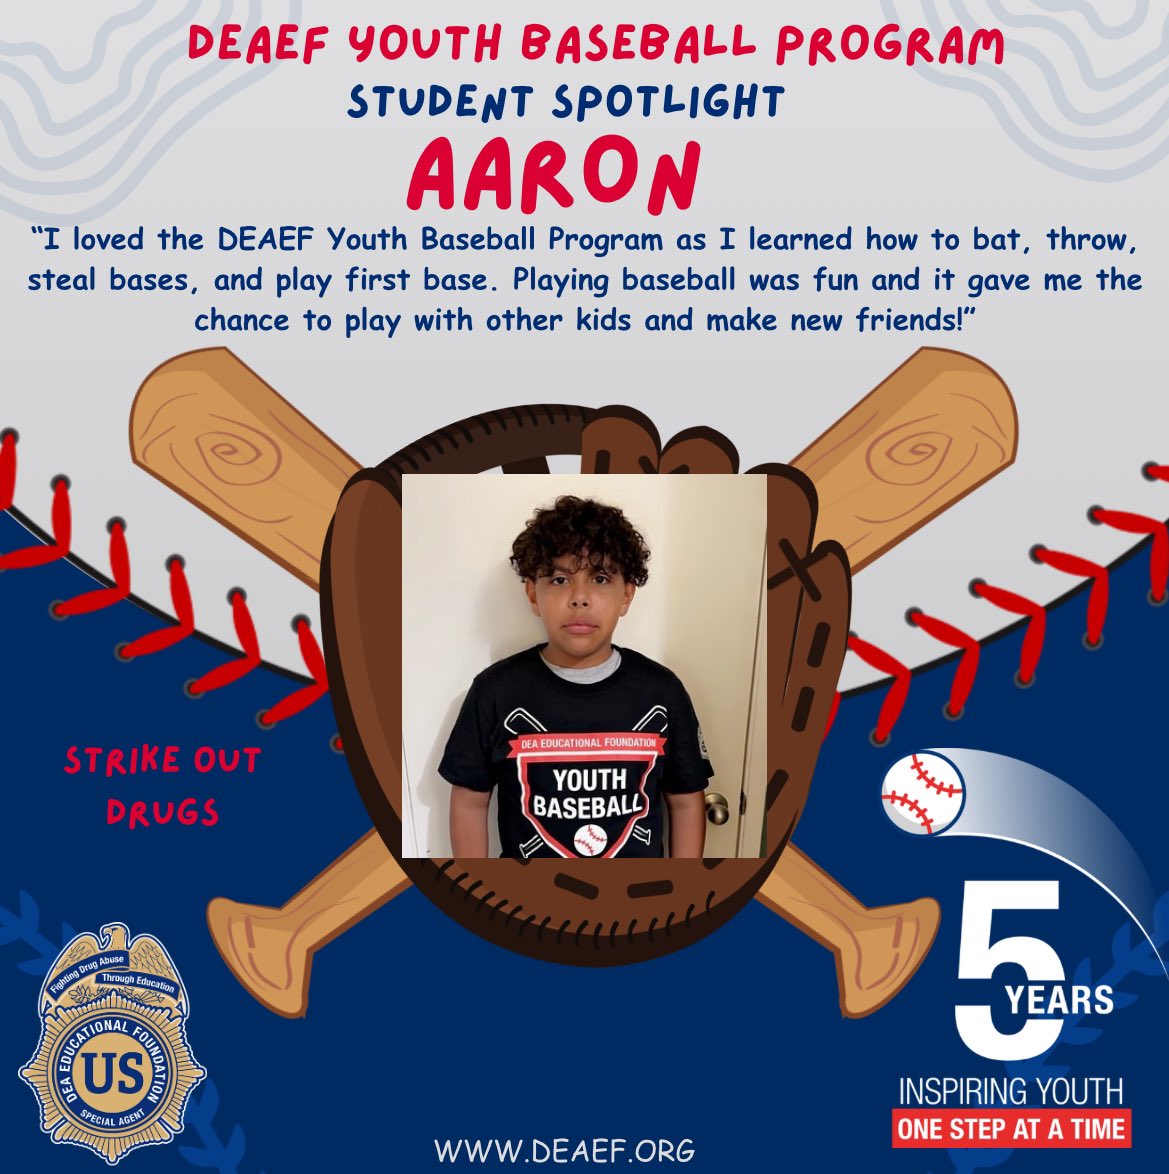 On Day 3 of our campaign we’re highlighting our youth, our future. Inspiration works both ways! Every day we are strengthened by our remarkable, talented Youth Baseball Program students! Meet Aaron! ⚾️⚾️ Help us reach more kids like Aaron: igfn.us/f/4rzz/n